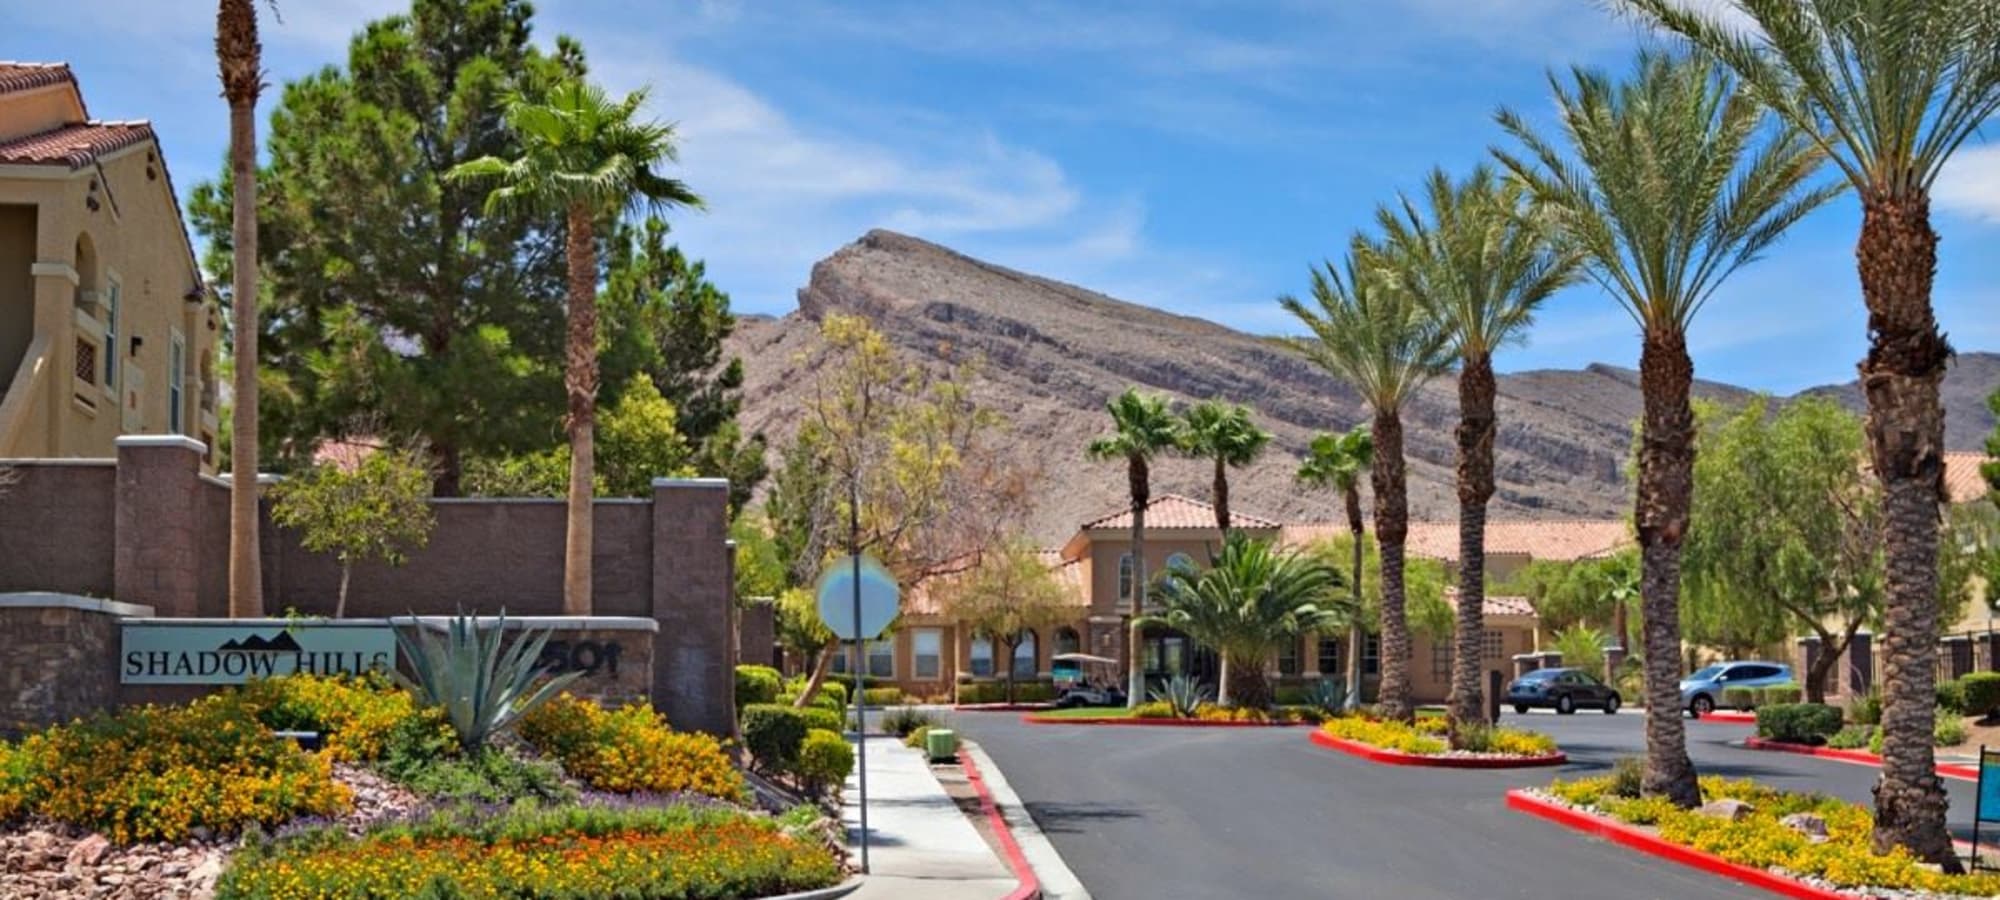 Landscaped front entrance at Shadow Hills at Lone Mountain in Las Vegas, Nevada